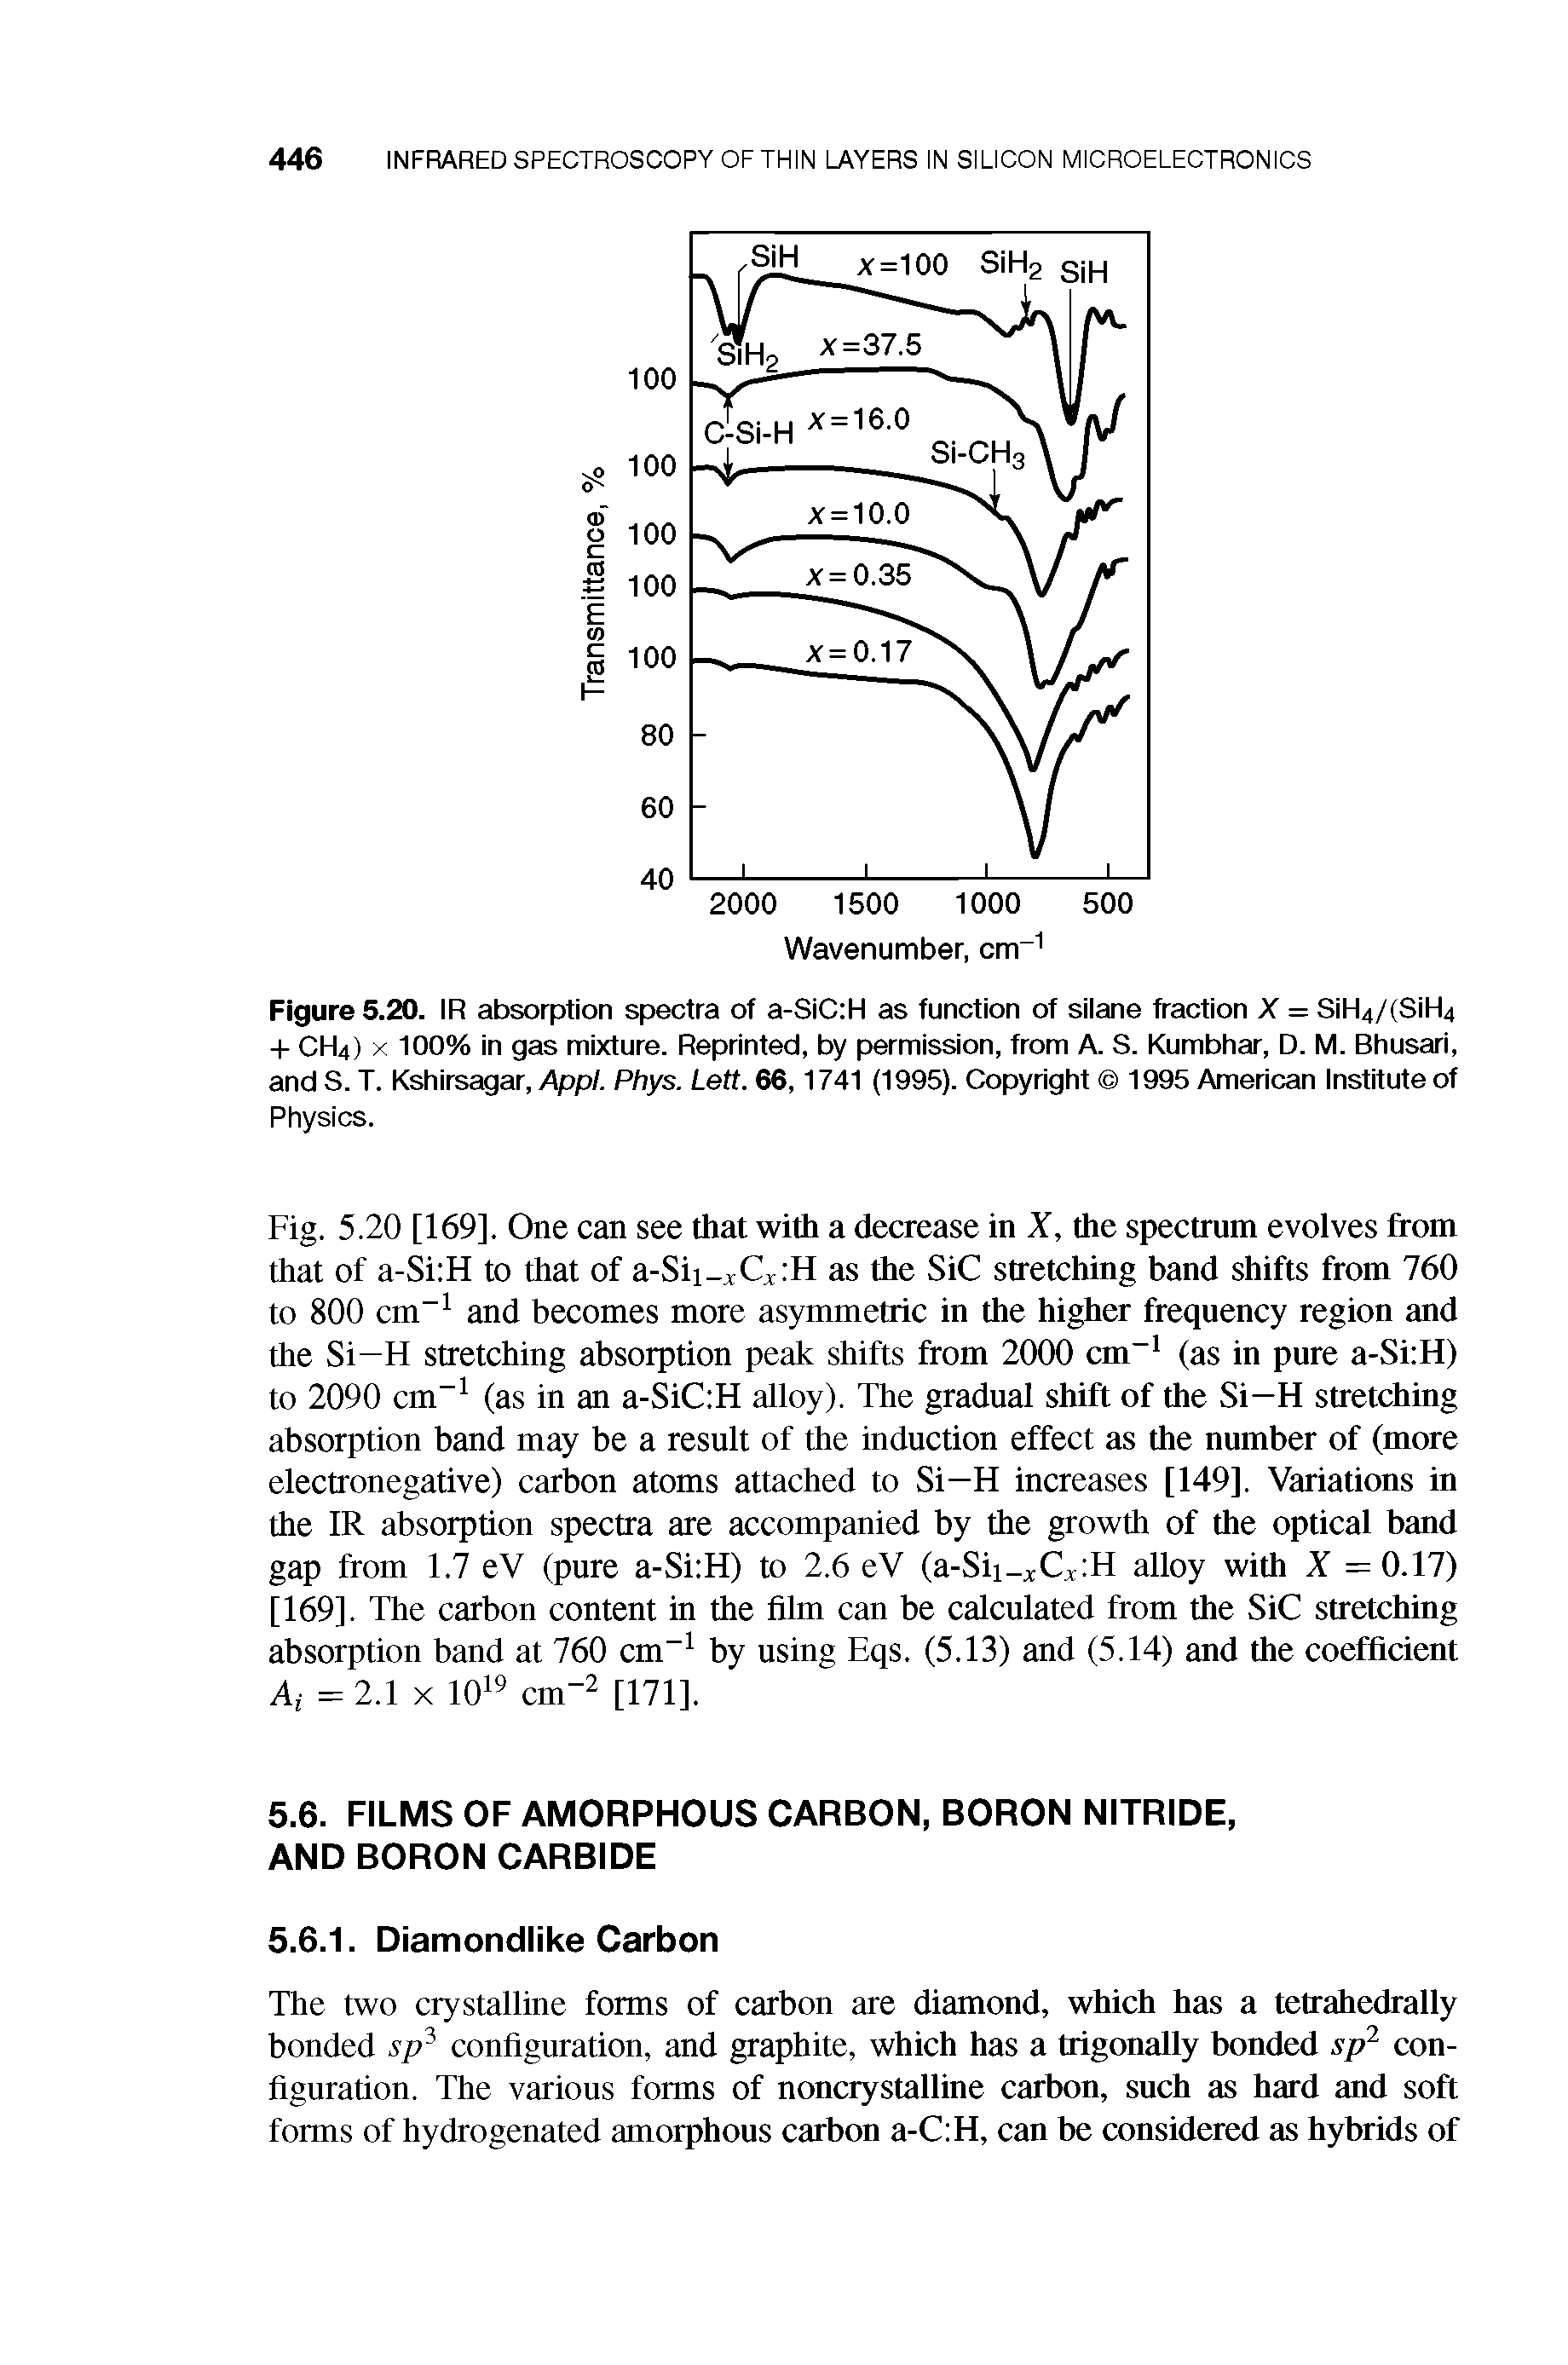 Fig. 5.20 [169]. One can see that with a decrease in X, the spectrum evolves from that of a-Si H to that of a-Sii-xQ.K as the SiC stretching band shifts from 760 to 800 cm" and becomes more asymmetric in the higher frequency region and the Si-H stretching absorption peak shifts from 2000 cm (as in pure a-Si H) to 2090 cm (as in an a-SiC H alloy). The gradual shift of the Si-H stretching absorption band may be a result of the induction effect as the number of (more electronegative) carbon atoms attached to Si—H increases [149]. Variations in the IR absorption spectra are accompanied by the growth of the optical band gap from 1.7 eV (pure a-Si H) to 2.6 eV (a-Sii cCx H alloy with X = 0.17) [169]. The carbon content in the film can be calculated from the SiC stretching absorption band at 760 cm by using Eqs. (5.13) and (5.14) and the coefficient Ai = 2.1 X lOi cm-2 [171].